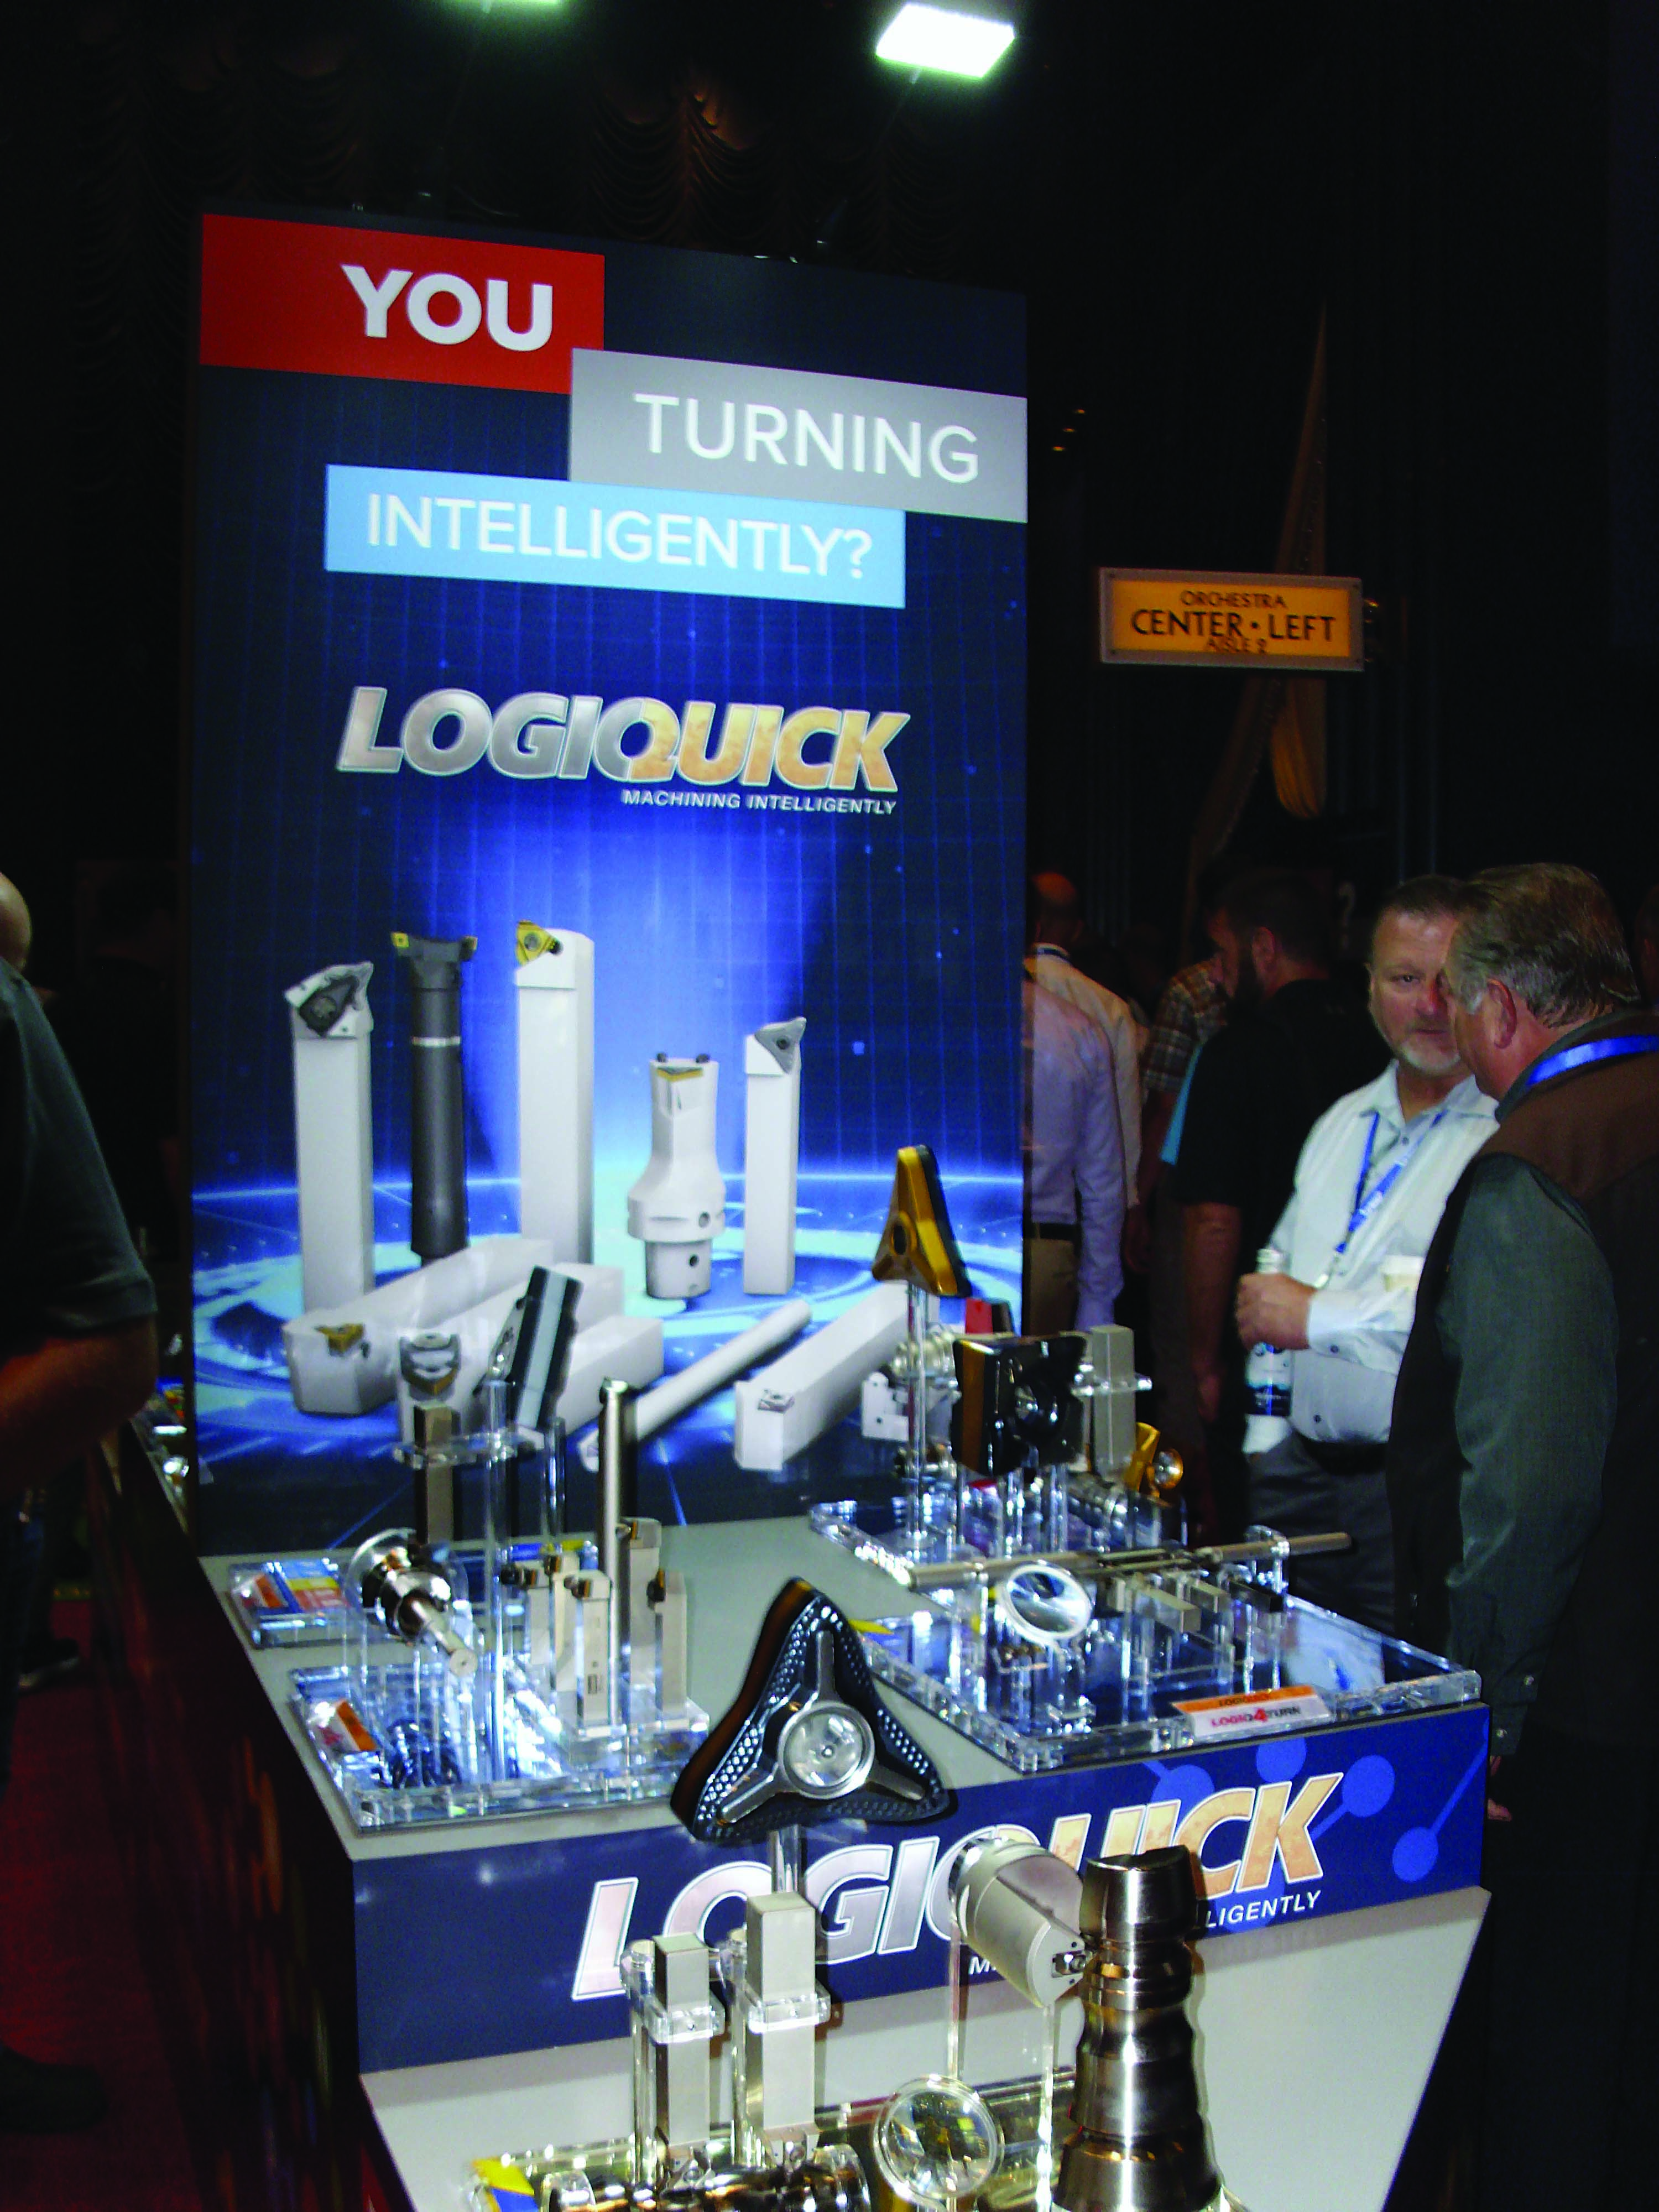 The lobby of the Encore Theater featured displays that focused on machining intelligently with LogiQuick. Photo courtesy A. Richter.